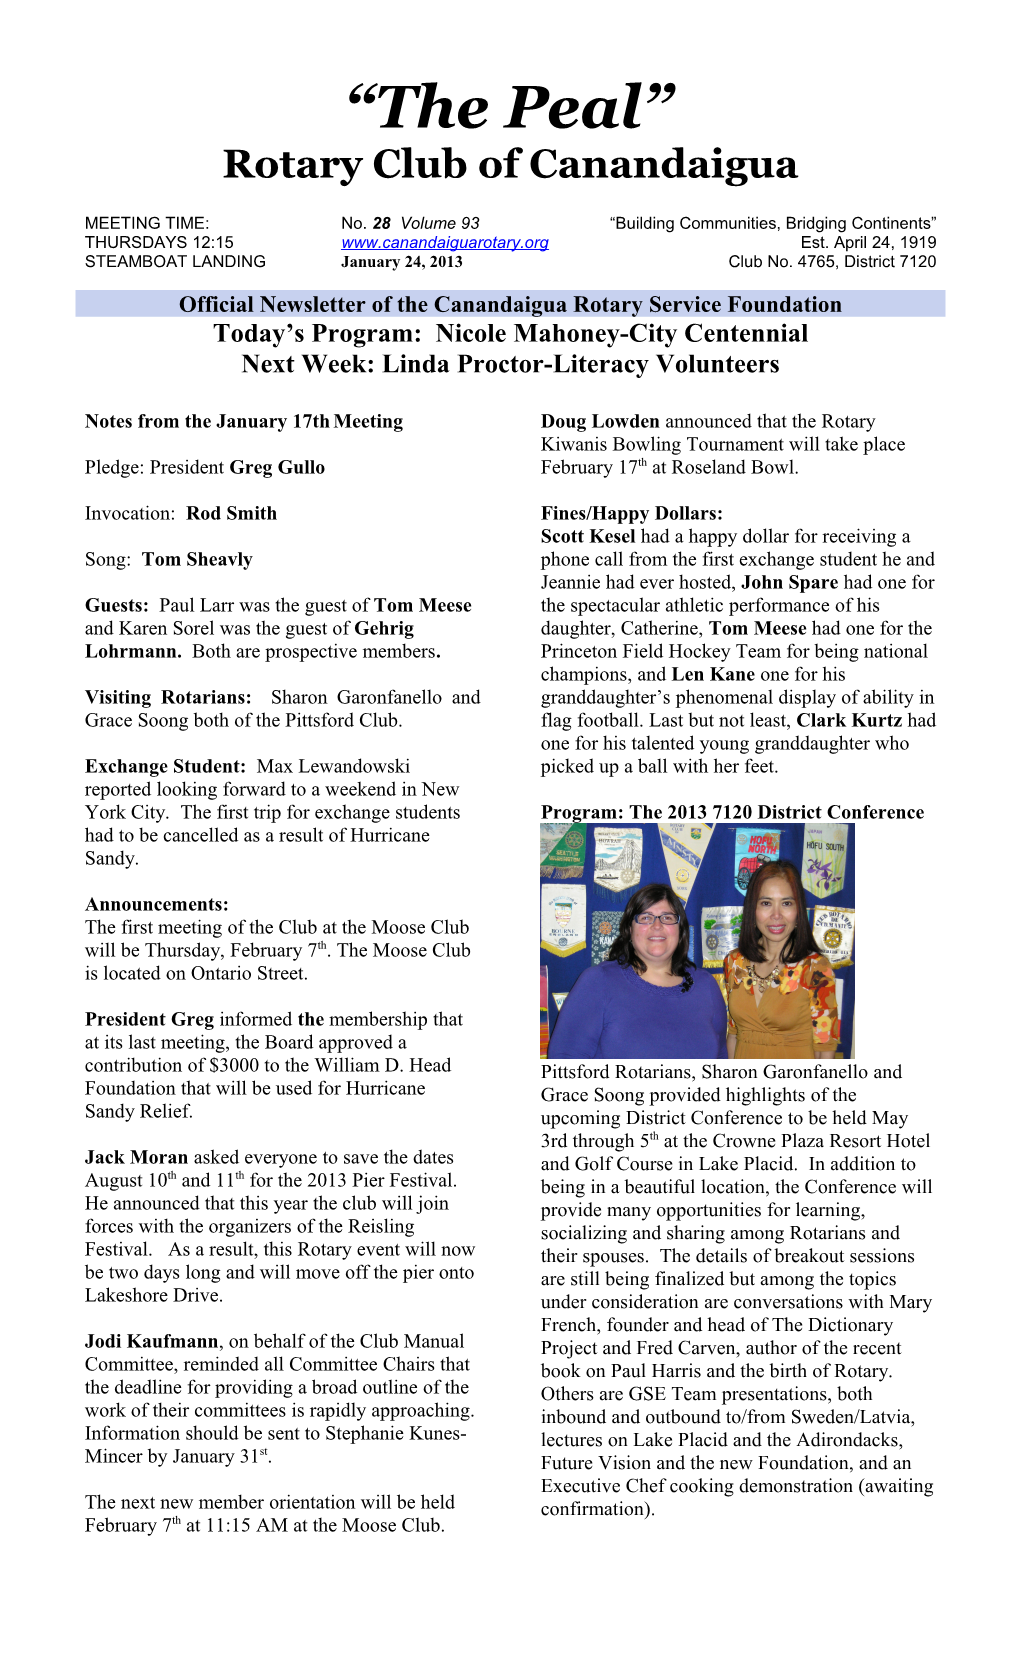 Official Newsletter of the Canandaigua Rotary Service Foundation